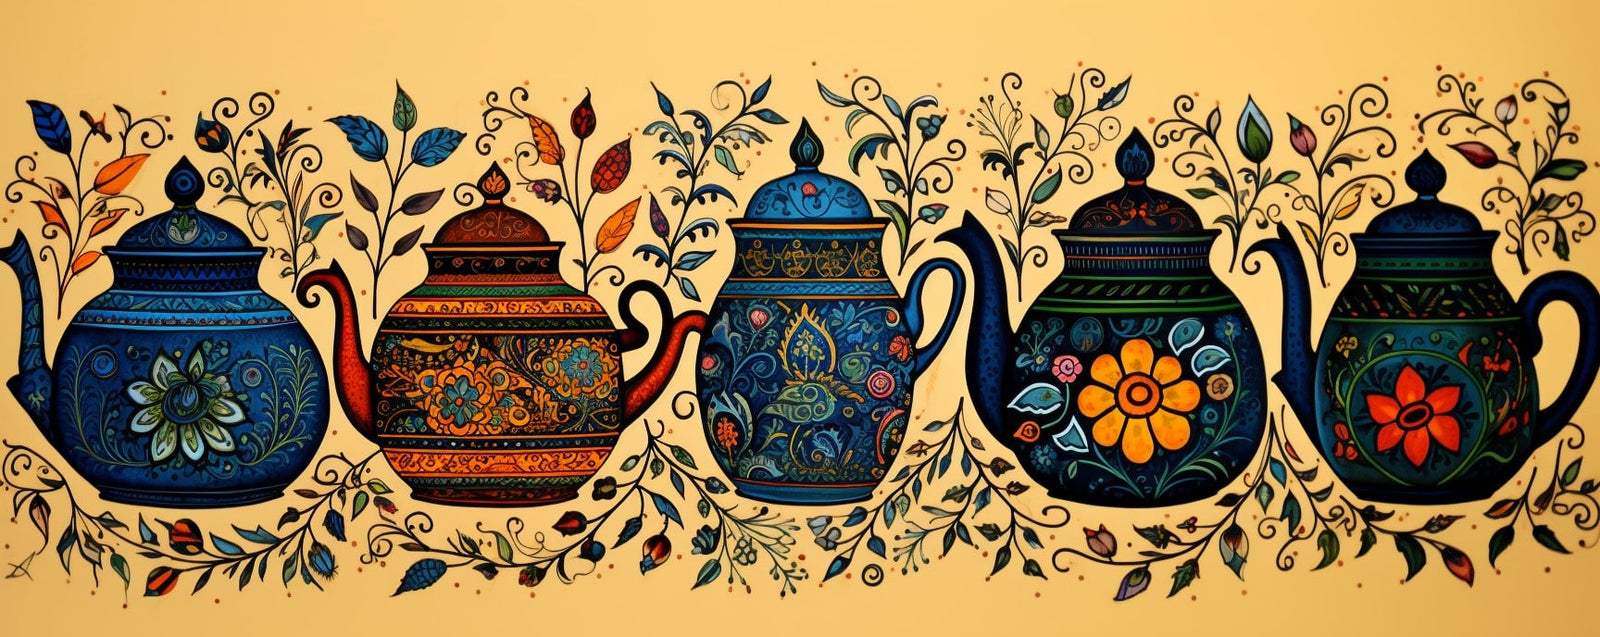 A collection of teapots and tea leaves in the style of Indian Madhubani paintings